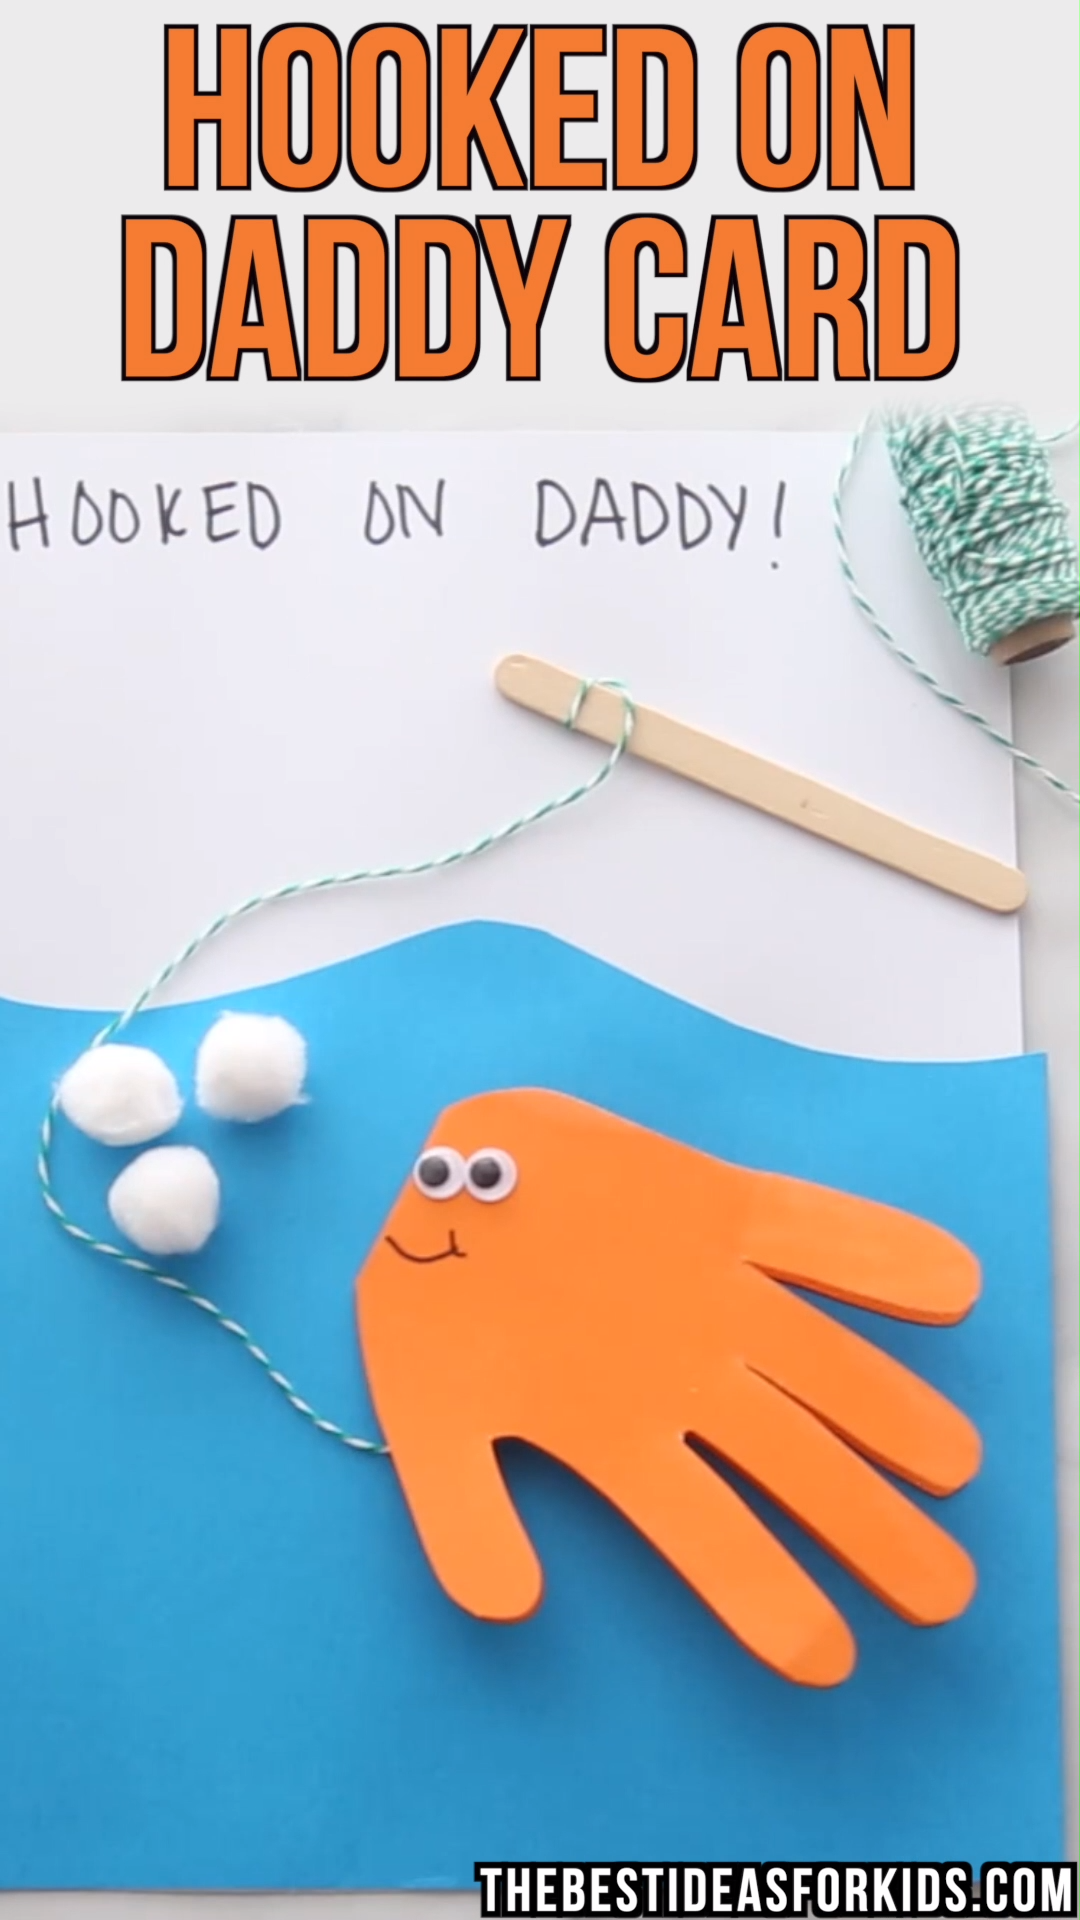 HOOKED ON DADDY CARD рџЋЈ -   25 planting Kindergarten video ideas